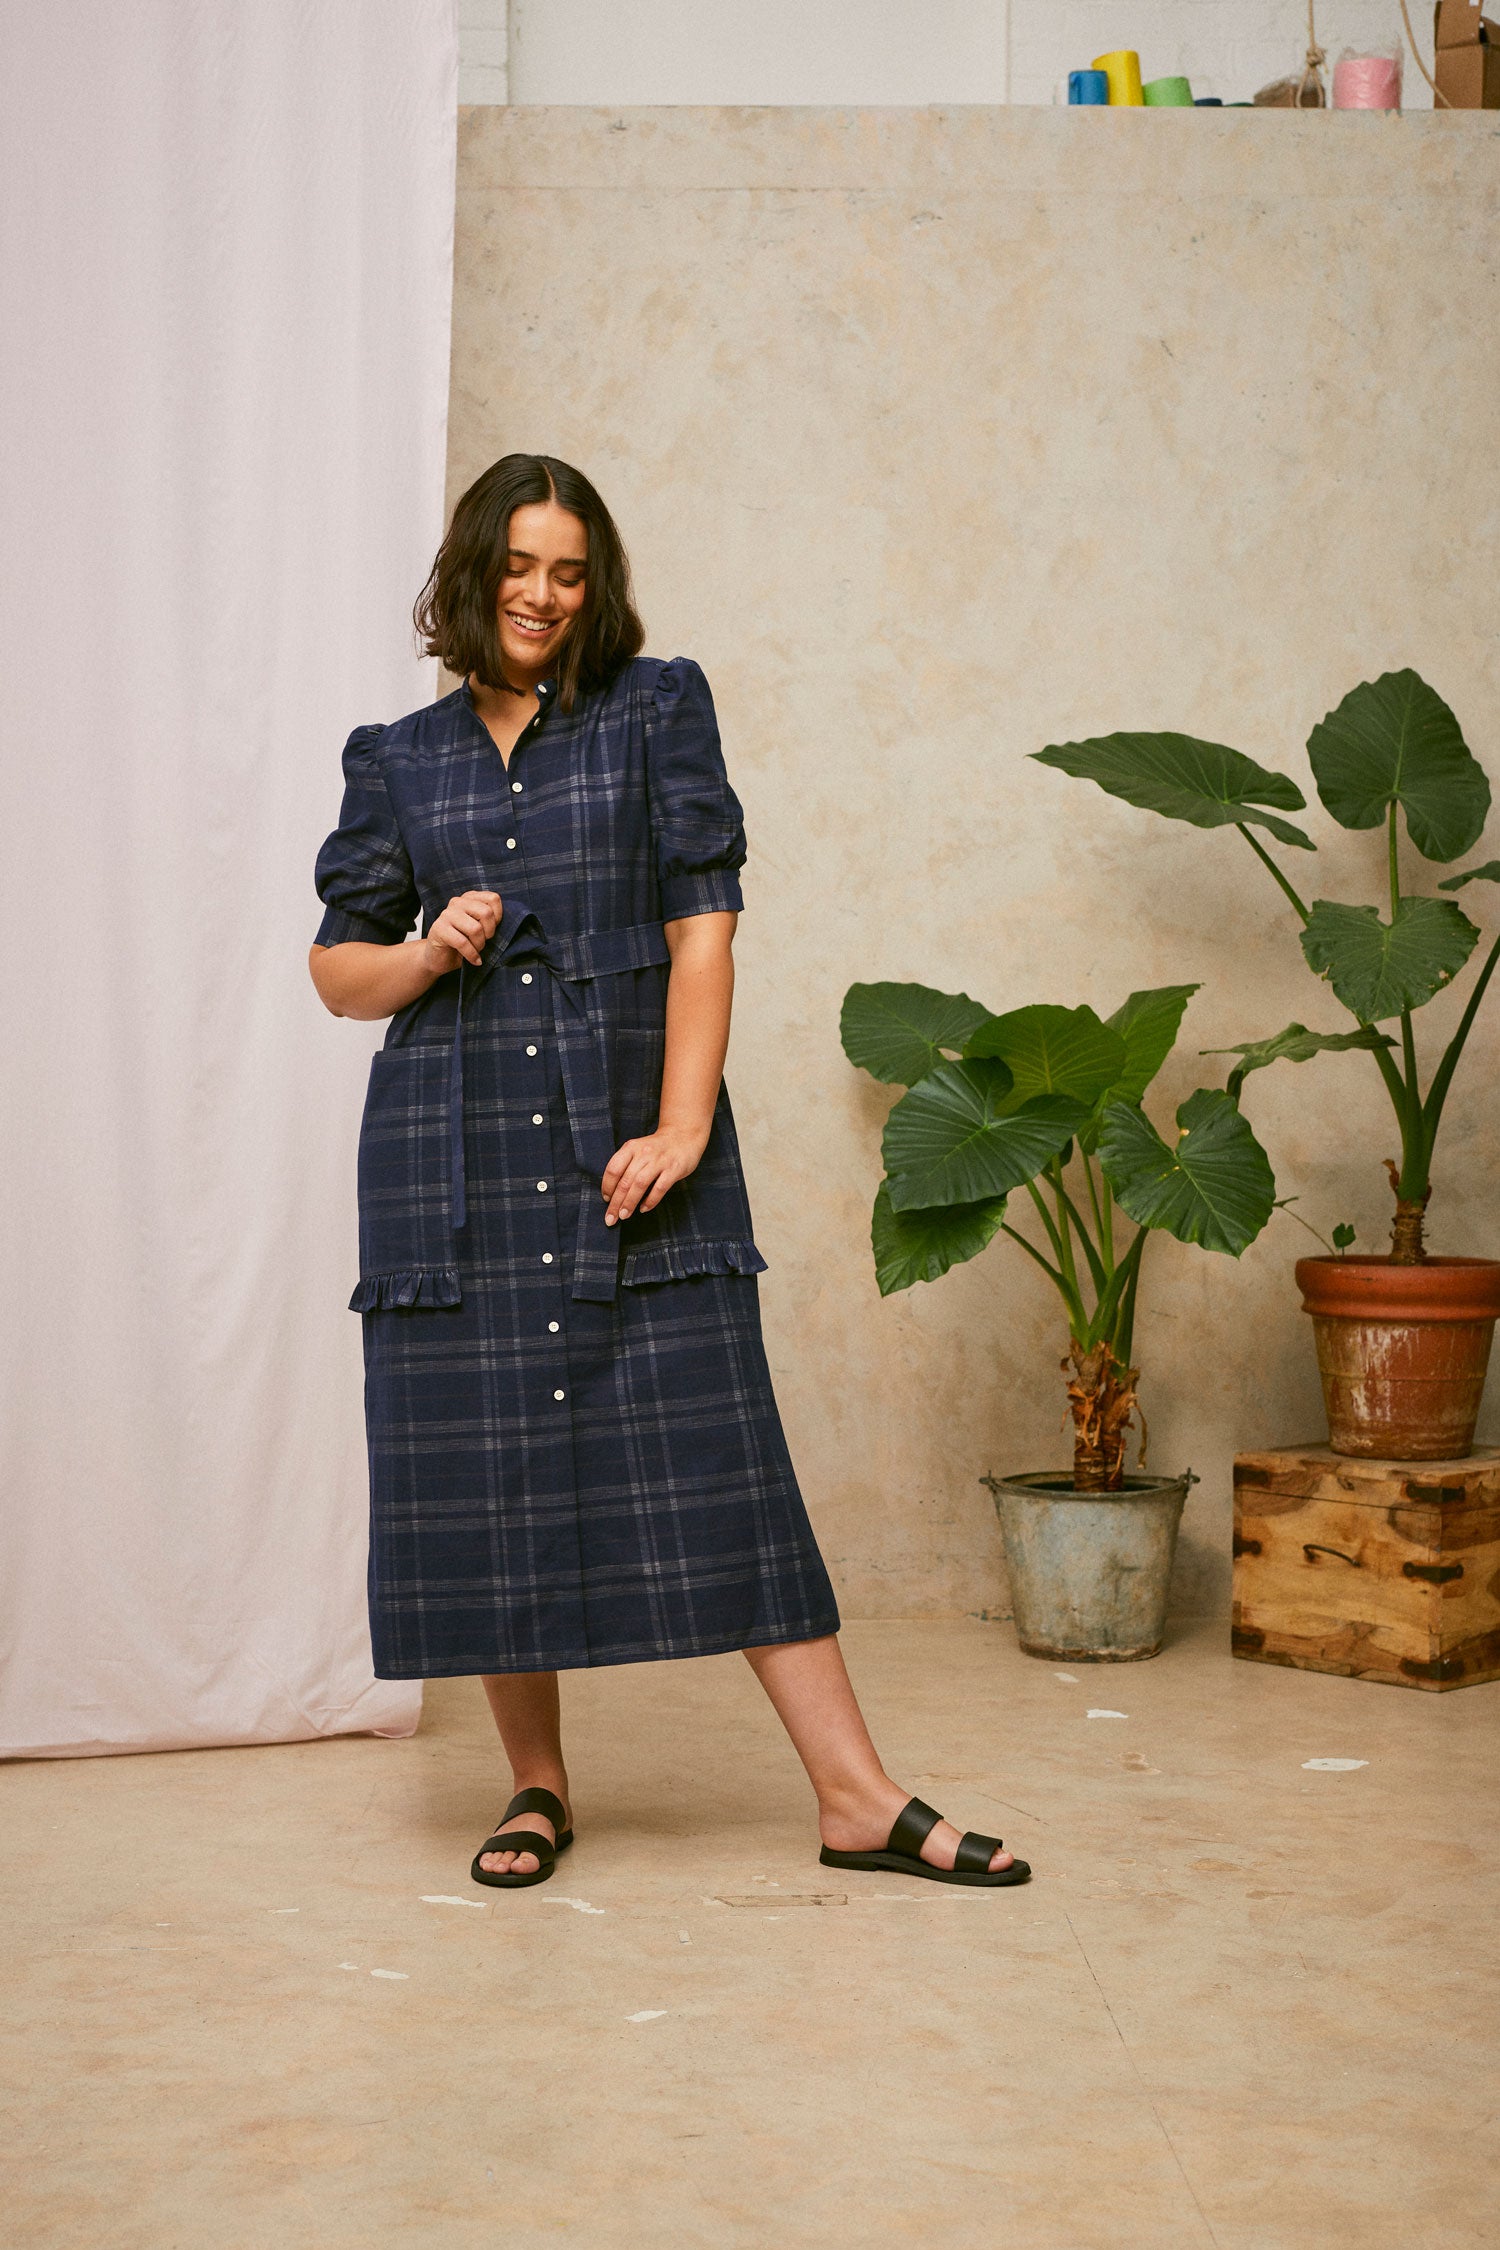 Full length shot of model wearing Saywood's Rosa navy check shirtdress, with belt tied round the waist. The model is smiling and pulling at the belt ties. Worn with black sandals. A plant and drop of pink fabric can be seen in the background.